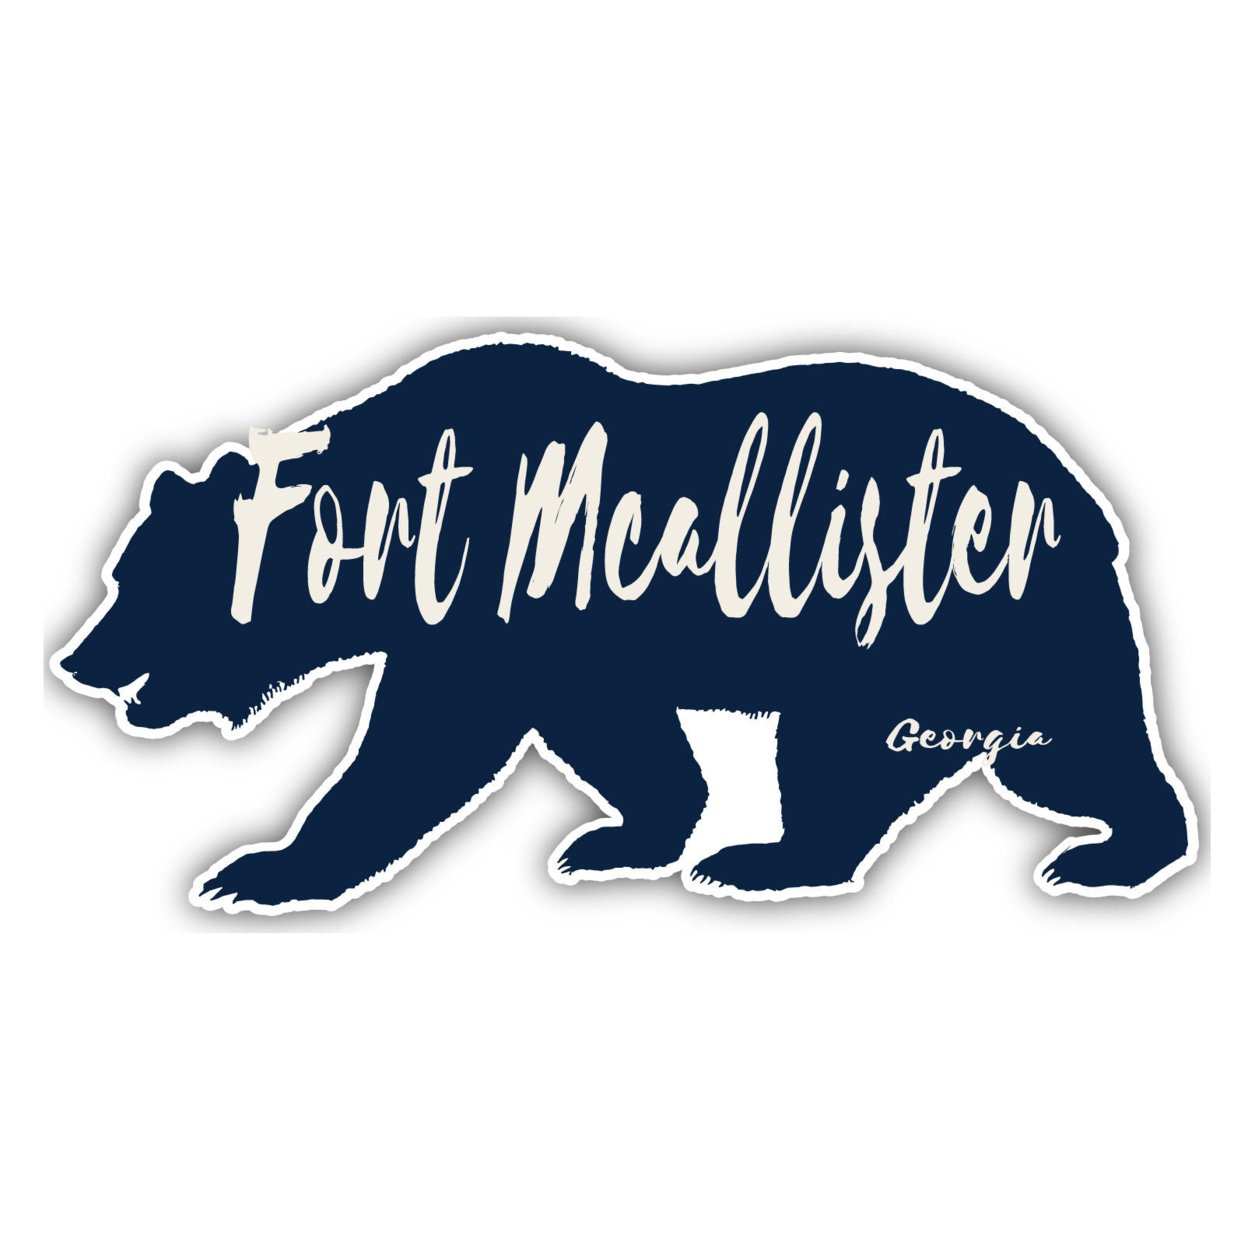 Fort McAllister Georgia Souvenir Decorative Stickers (Choose Theme And Size) - Single Unit, 8-Inch, Great Outdoors